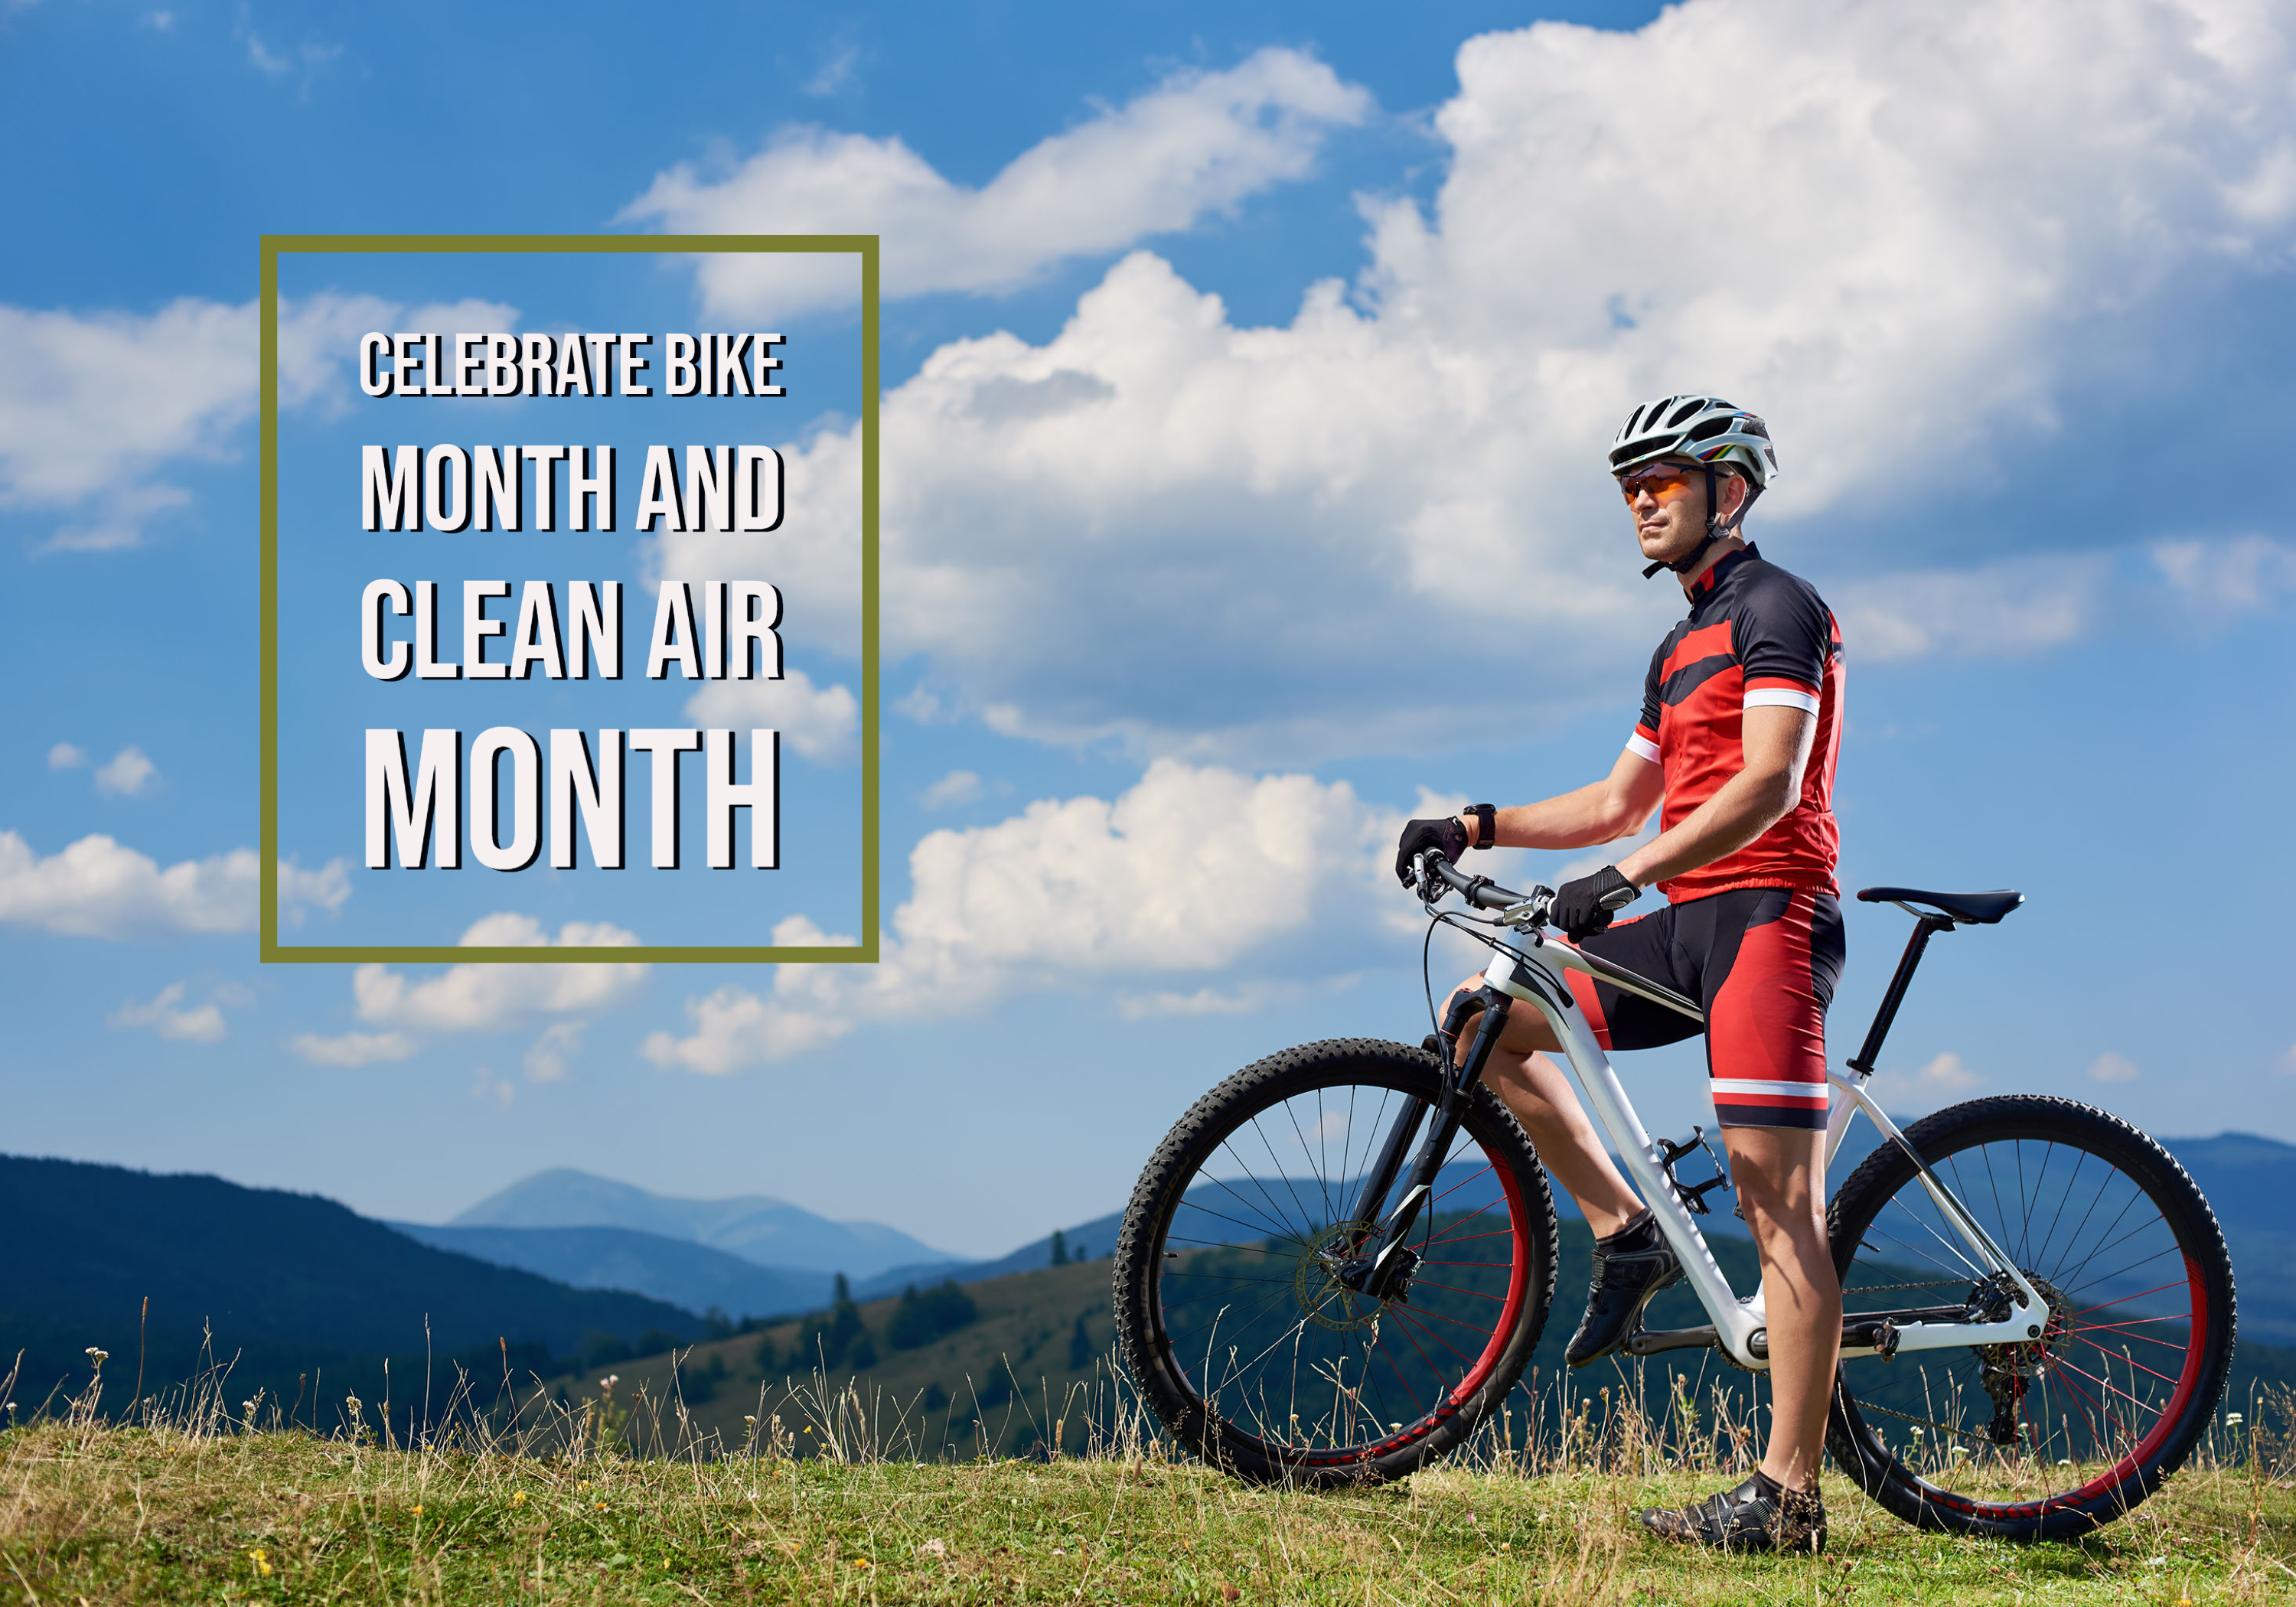 Make a Difference this Clean Air and Bike Month